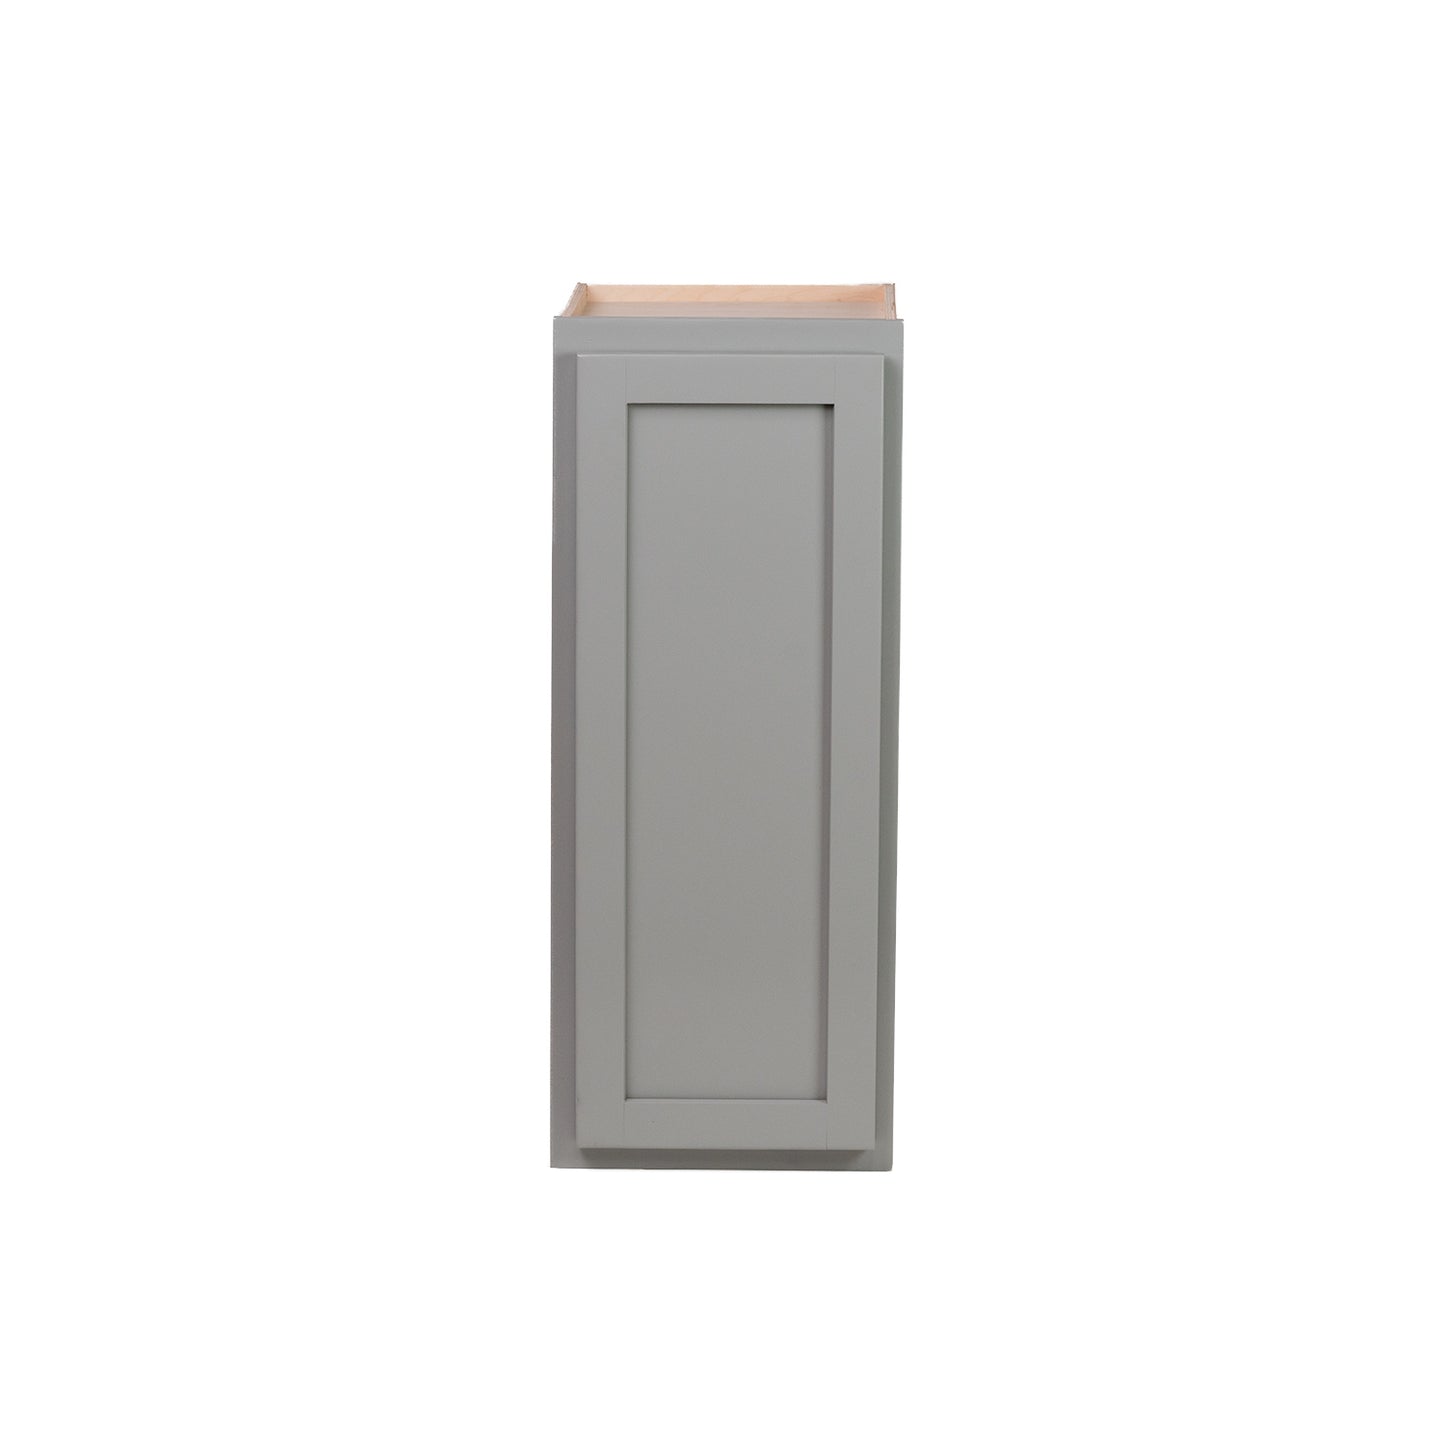 Quicklock Magnetic Gray Wall Cabinet- Slim 30"H x (9", 12", 15"W)